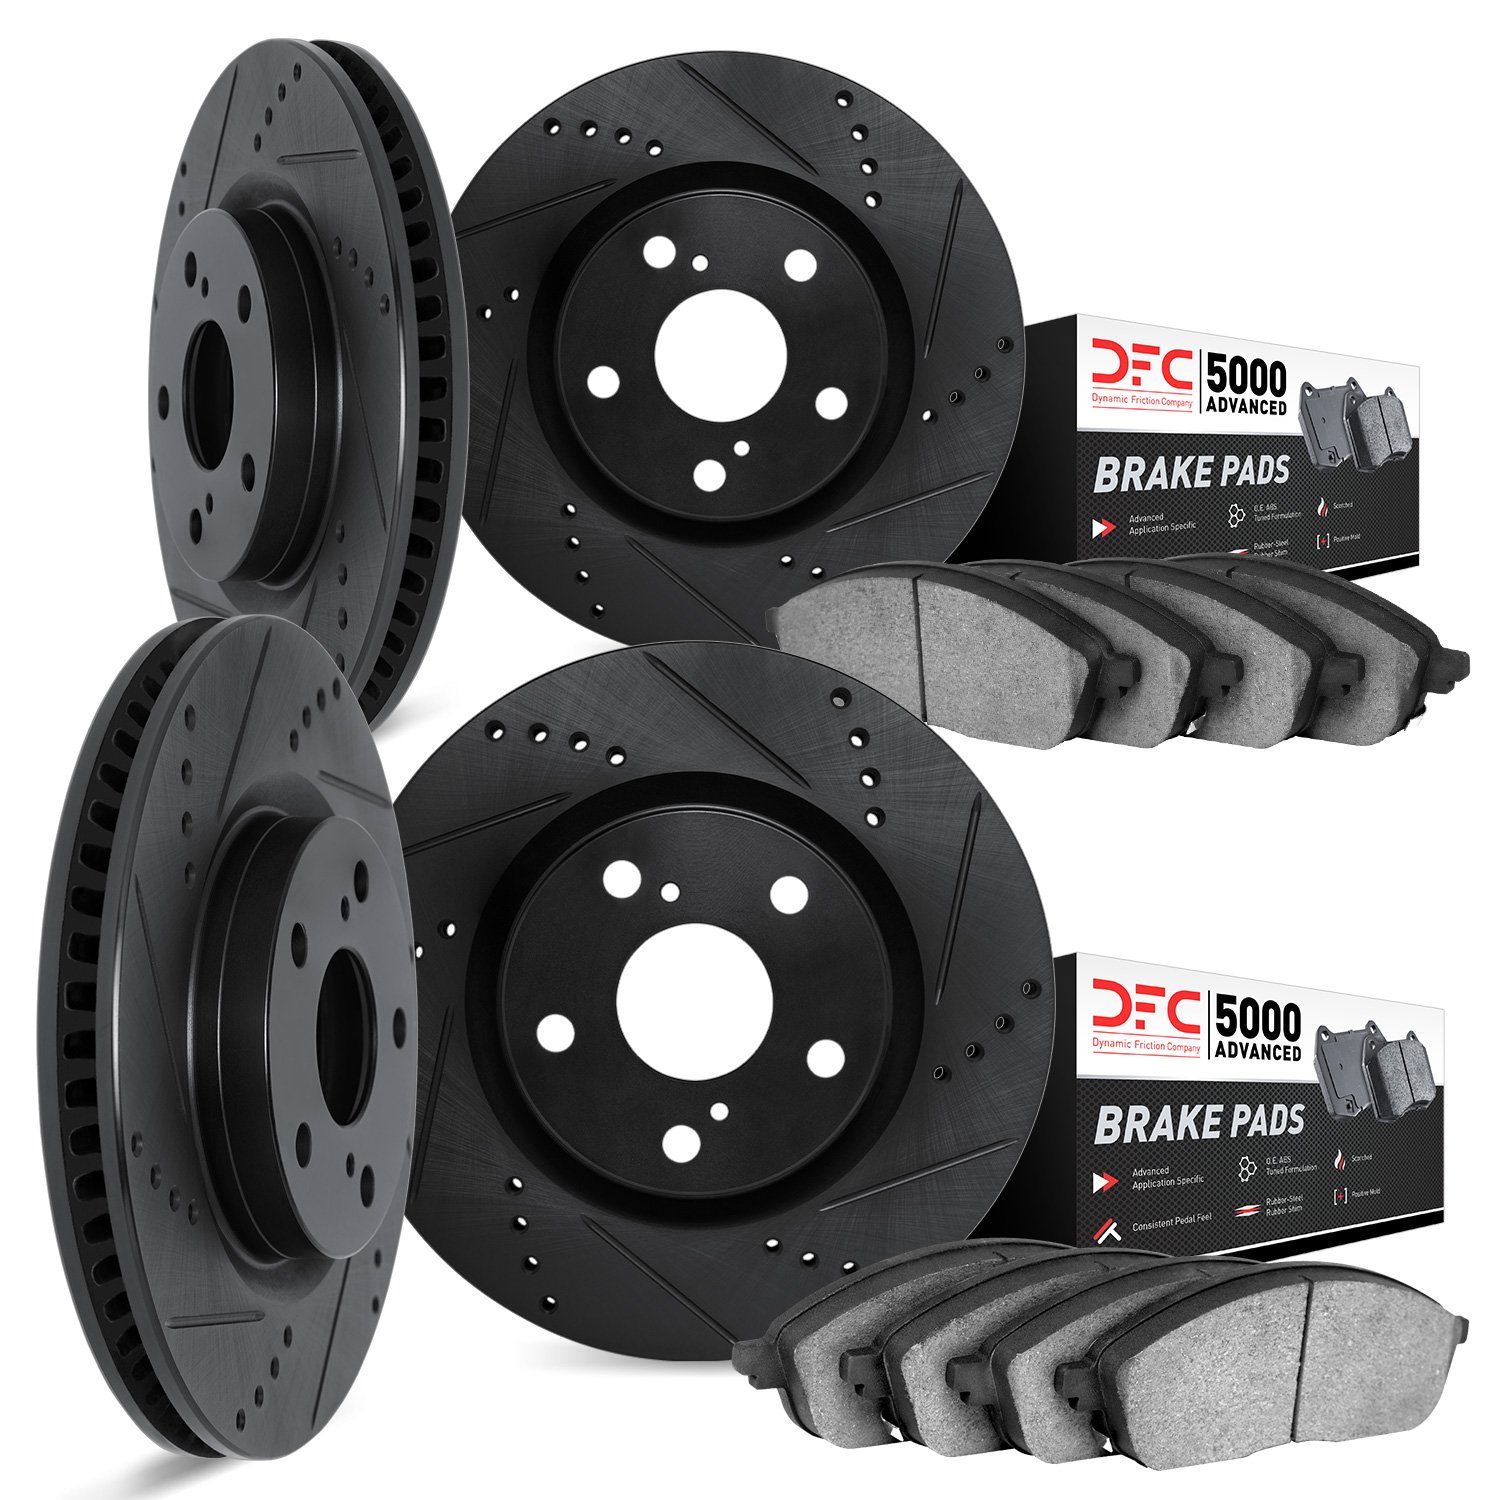 8504-31010 Drilled/Slotted Brake Rotors w/5000 Advanced Brake Pads Kit [Black], 2000-2003 BMW, Position: Front and Rear